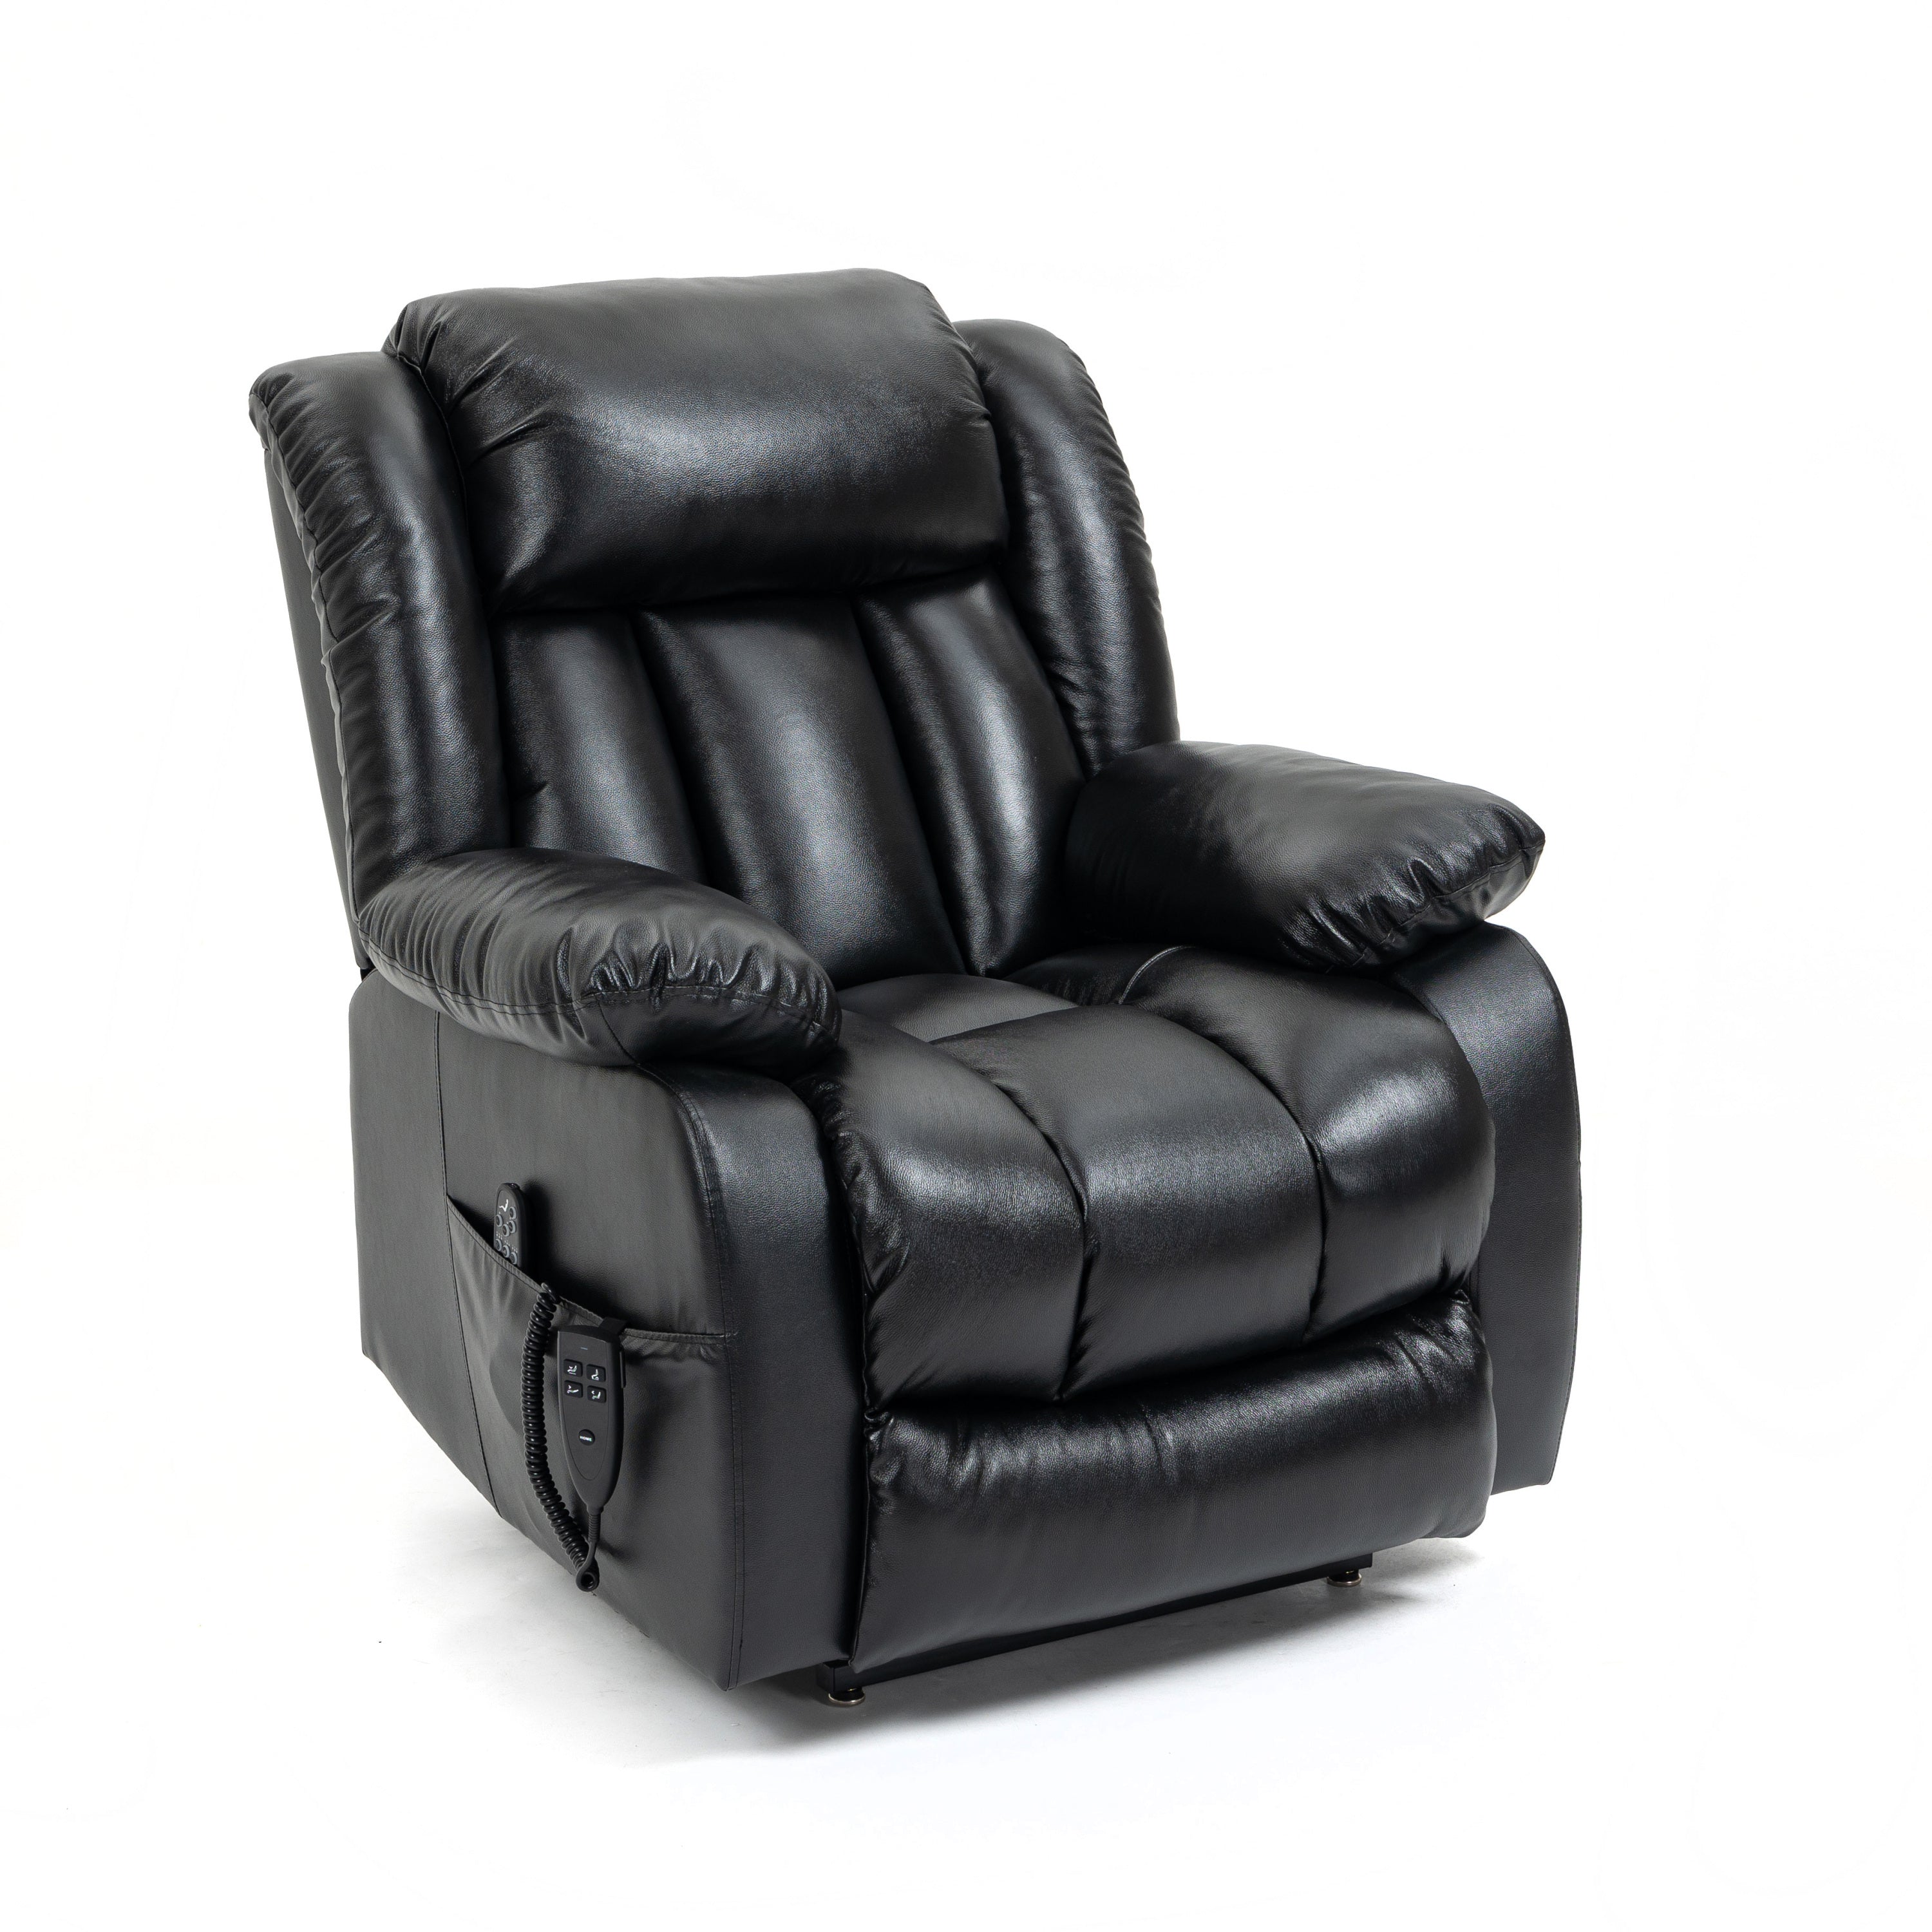 Black Leather Power Lift Recliner Chair, seated, angle view